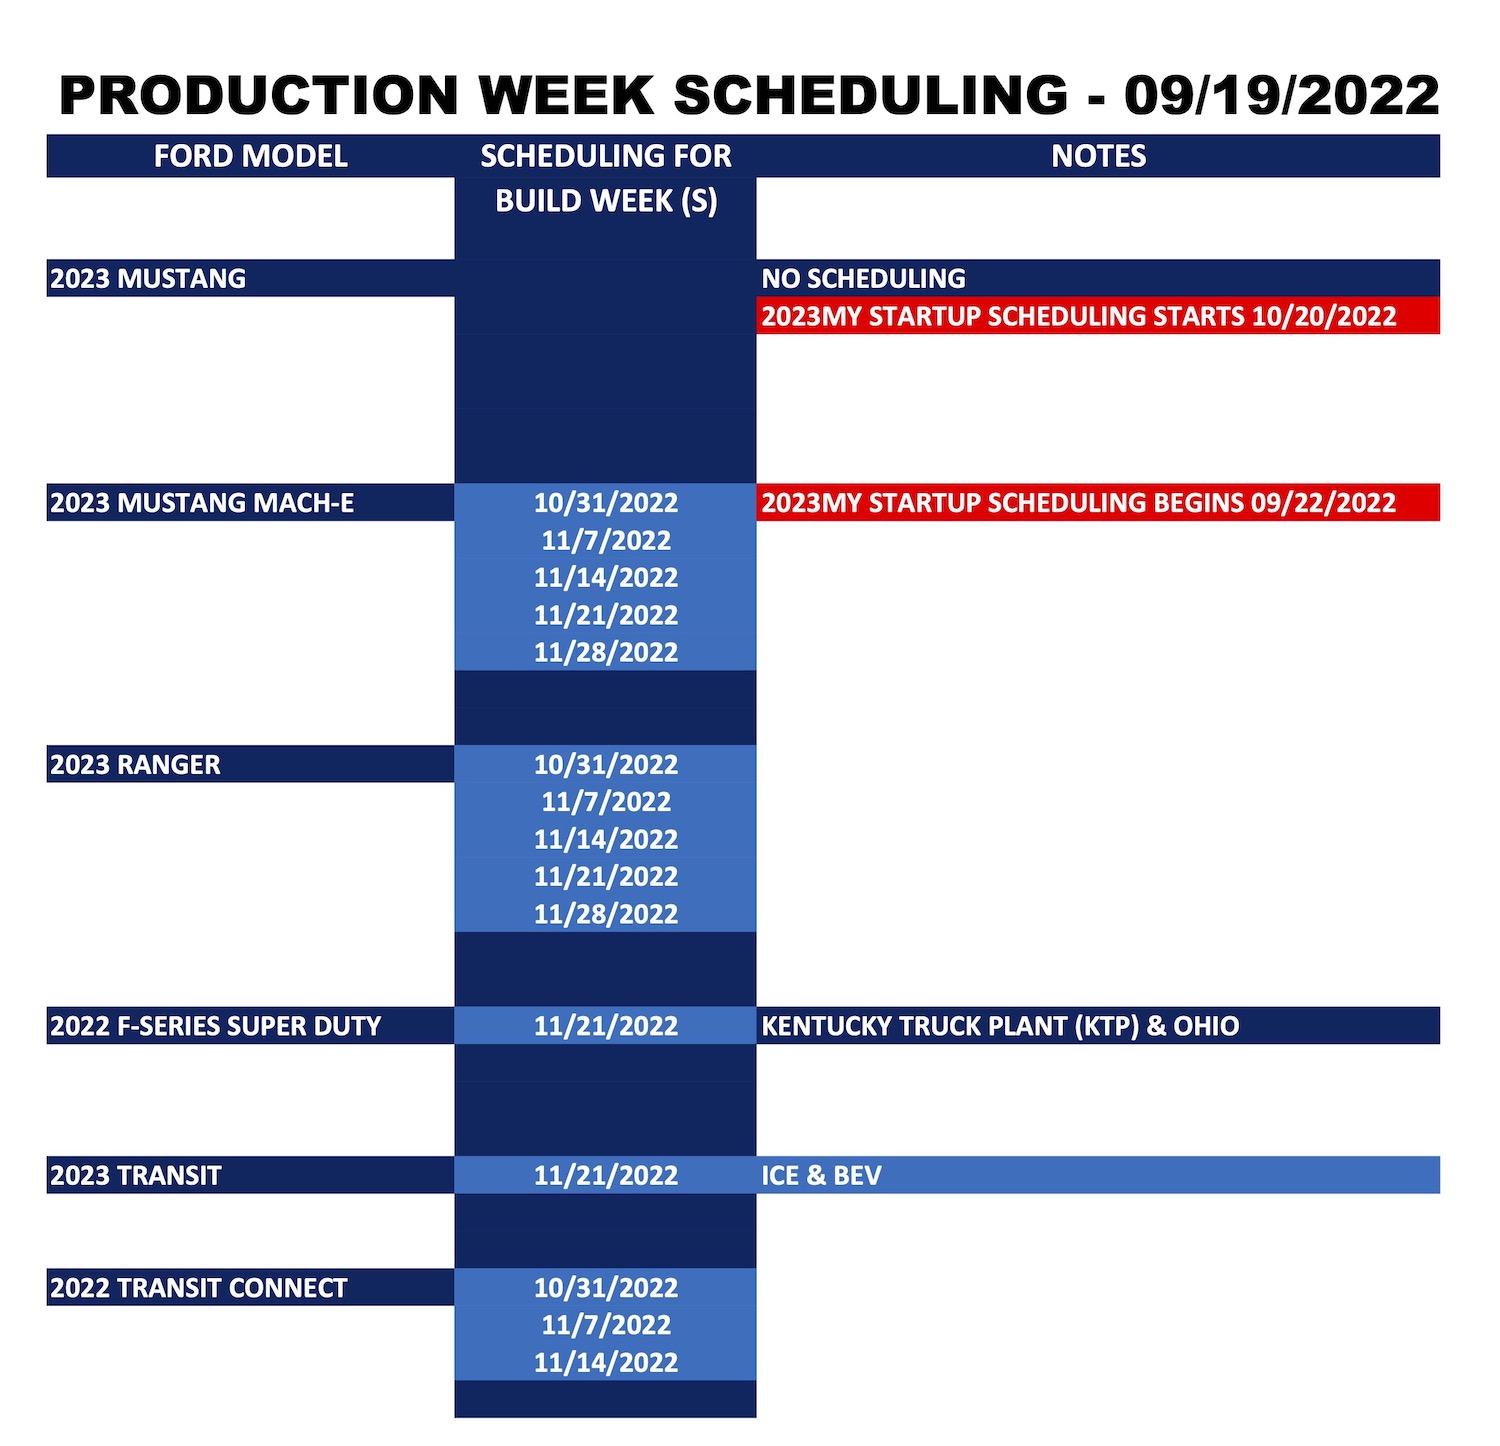 Ford F-150 Lightning ⏰ F-150 Lightning Scheduling This Week (9/19) For Build Week 10/31 Ford_Forums_Production Week Scheduling_2022-09-19_2